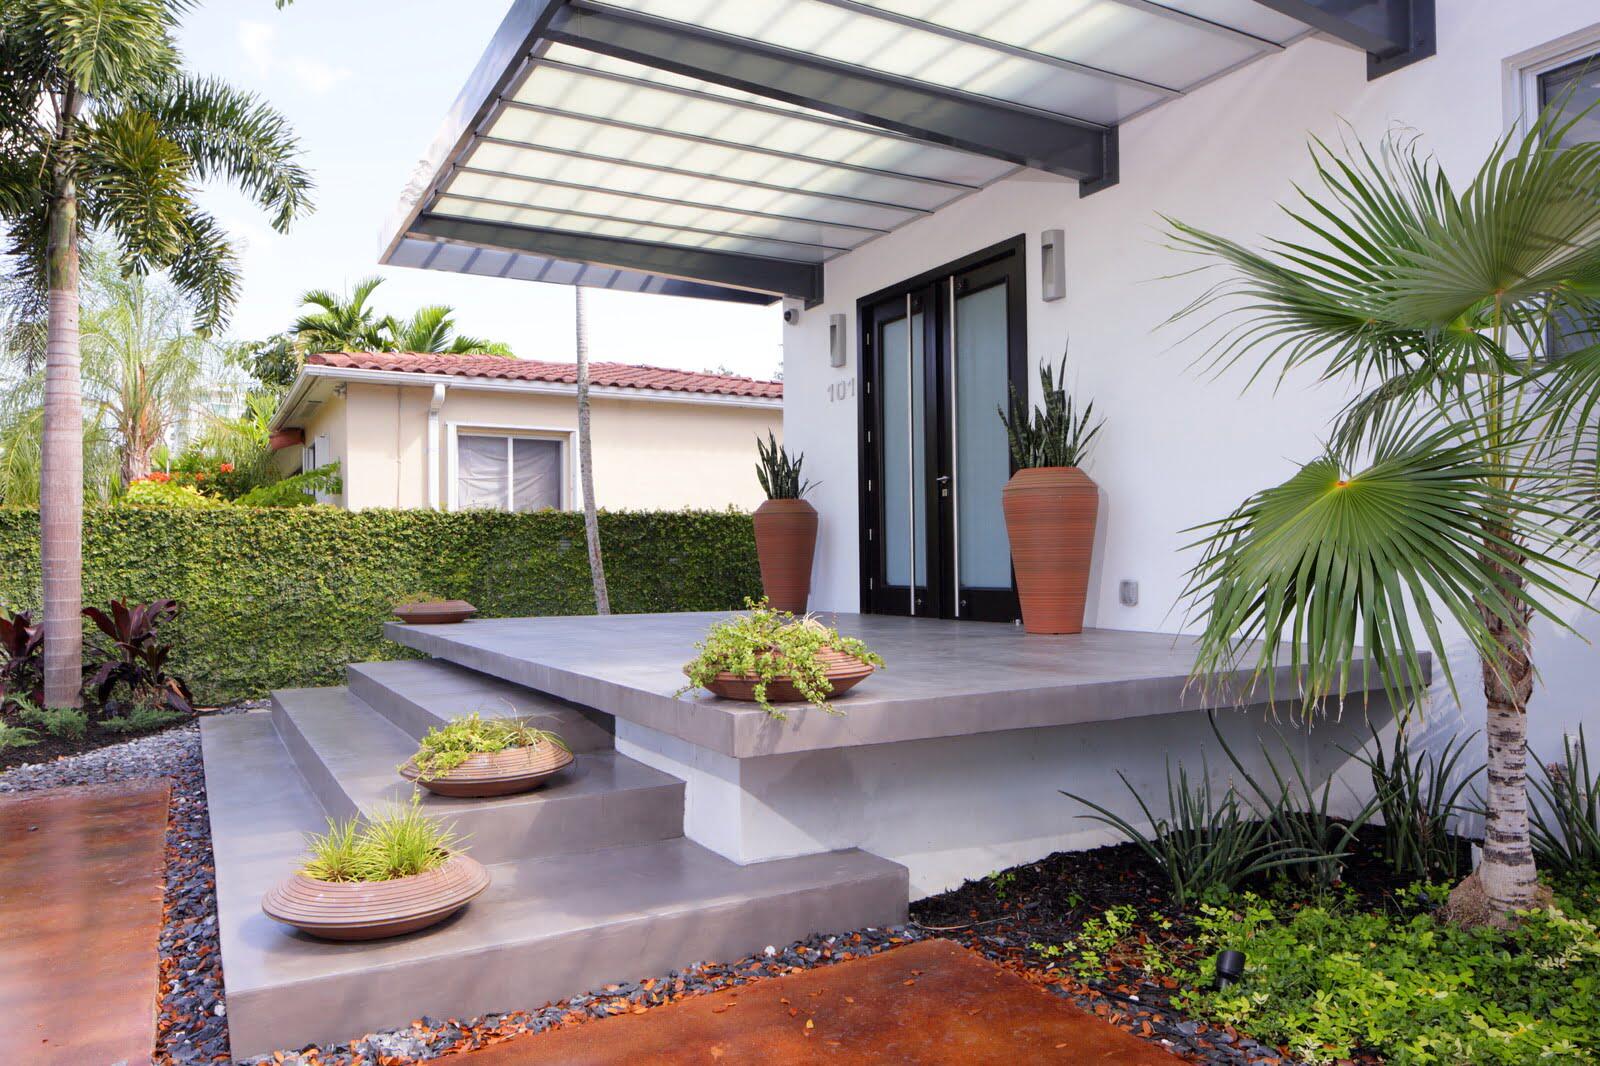 How To Make Concrete Porch Look Better